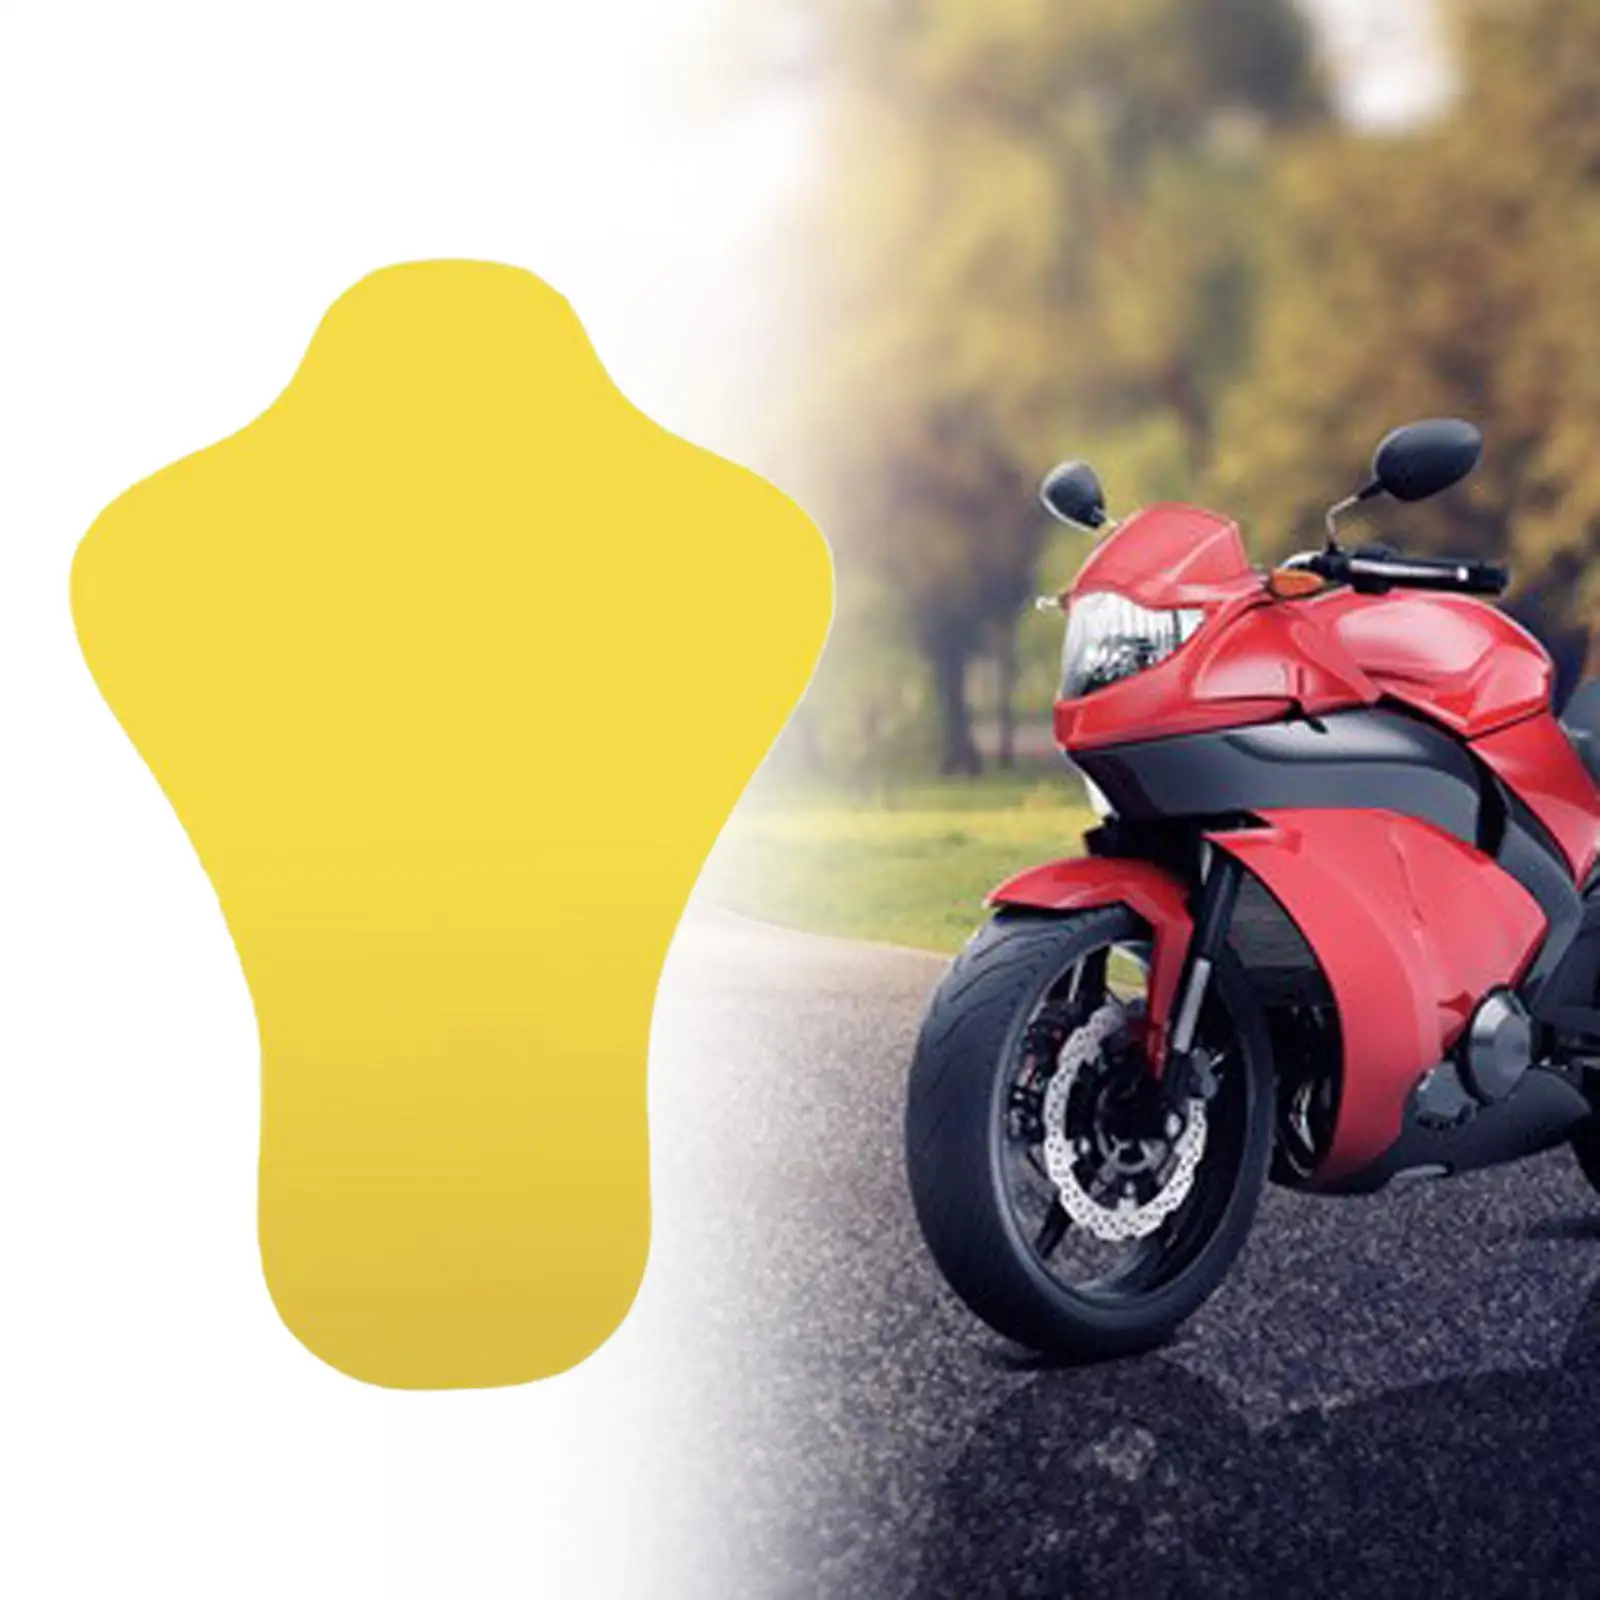  Motorcycle Lightweight Breathable Motorbike Protection